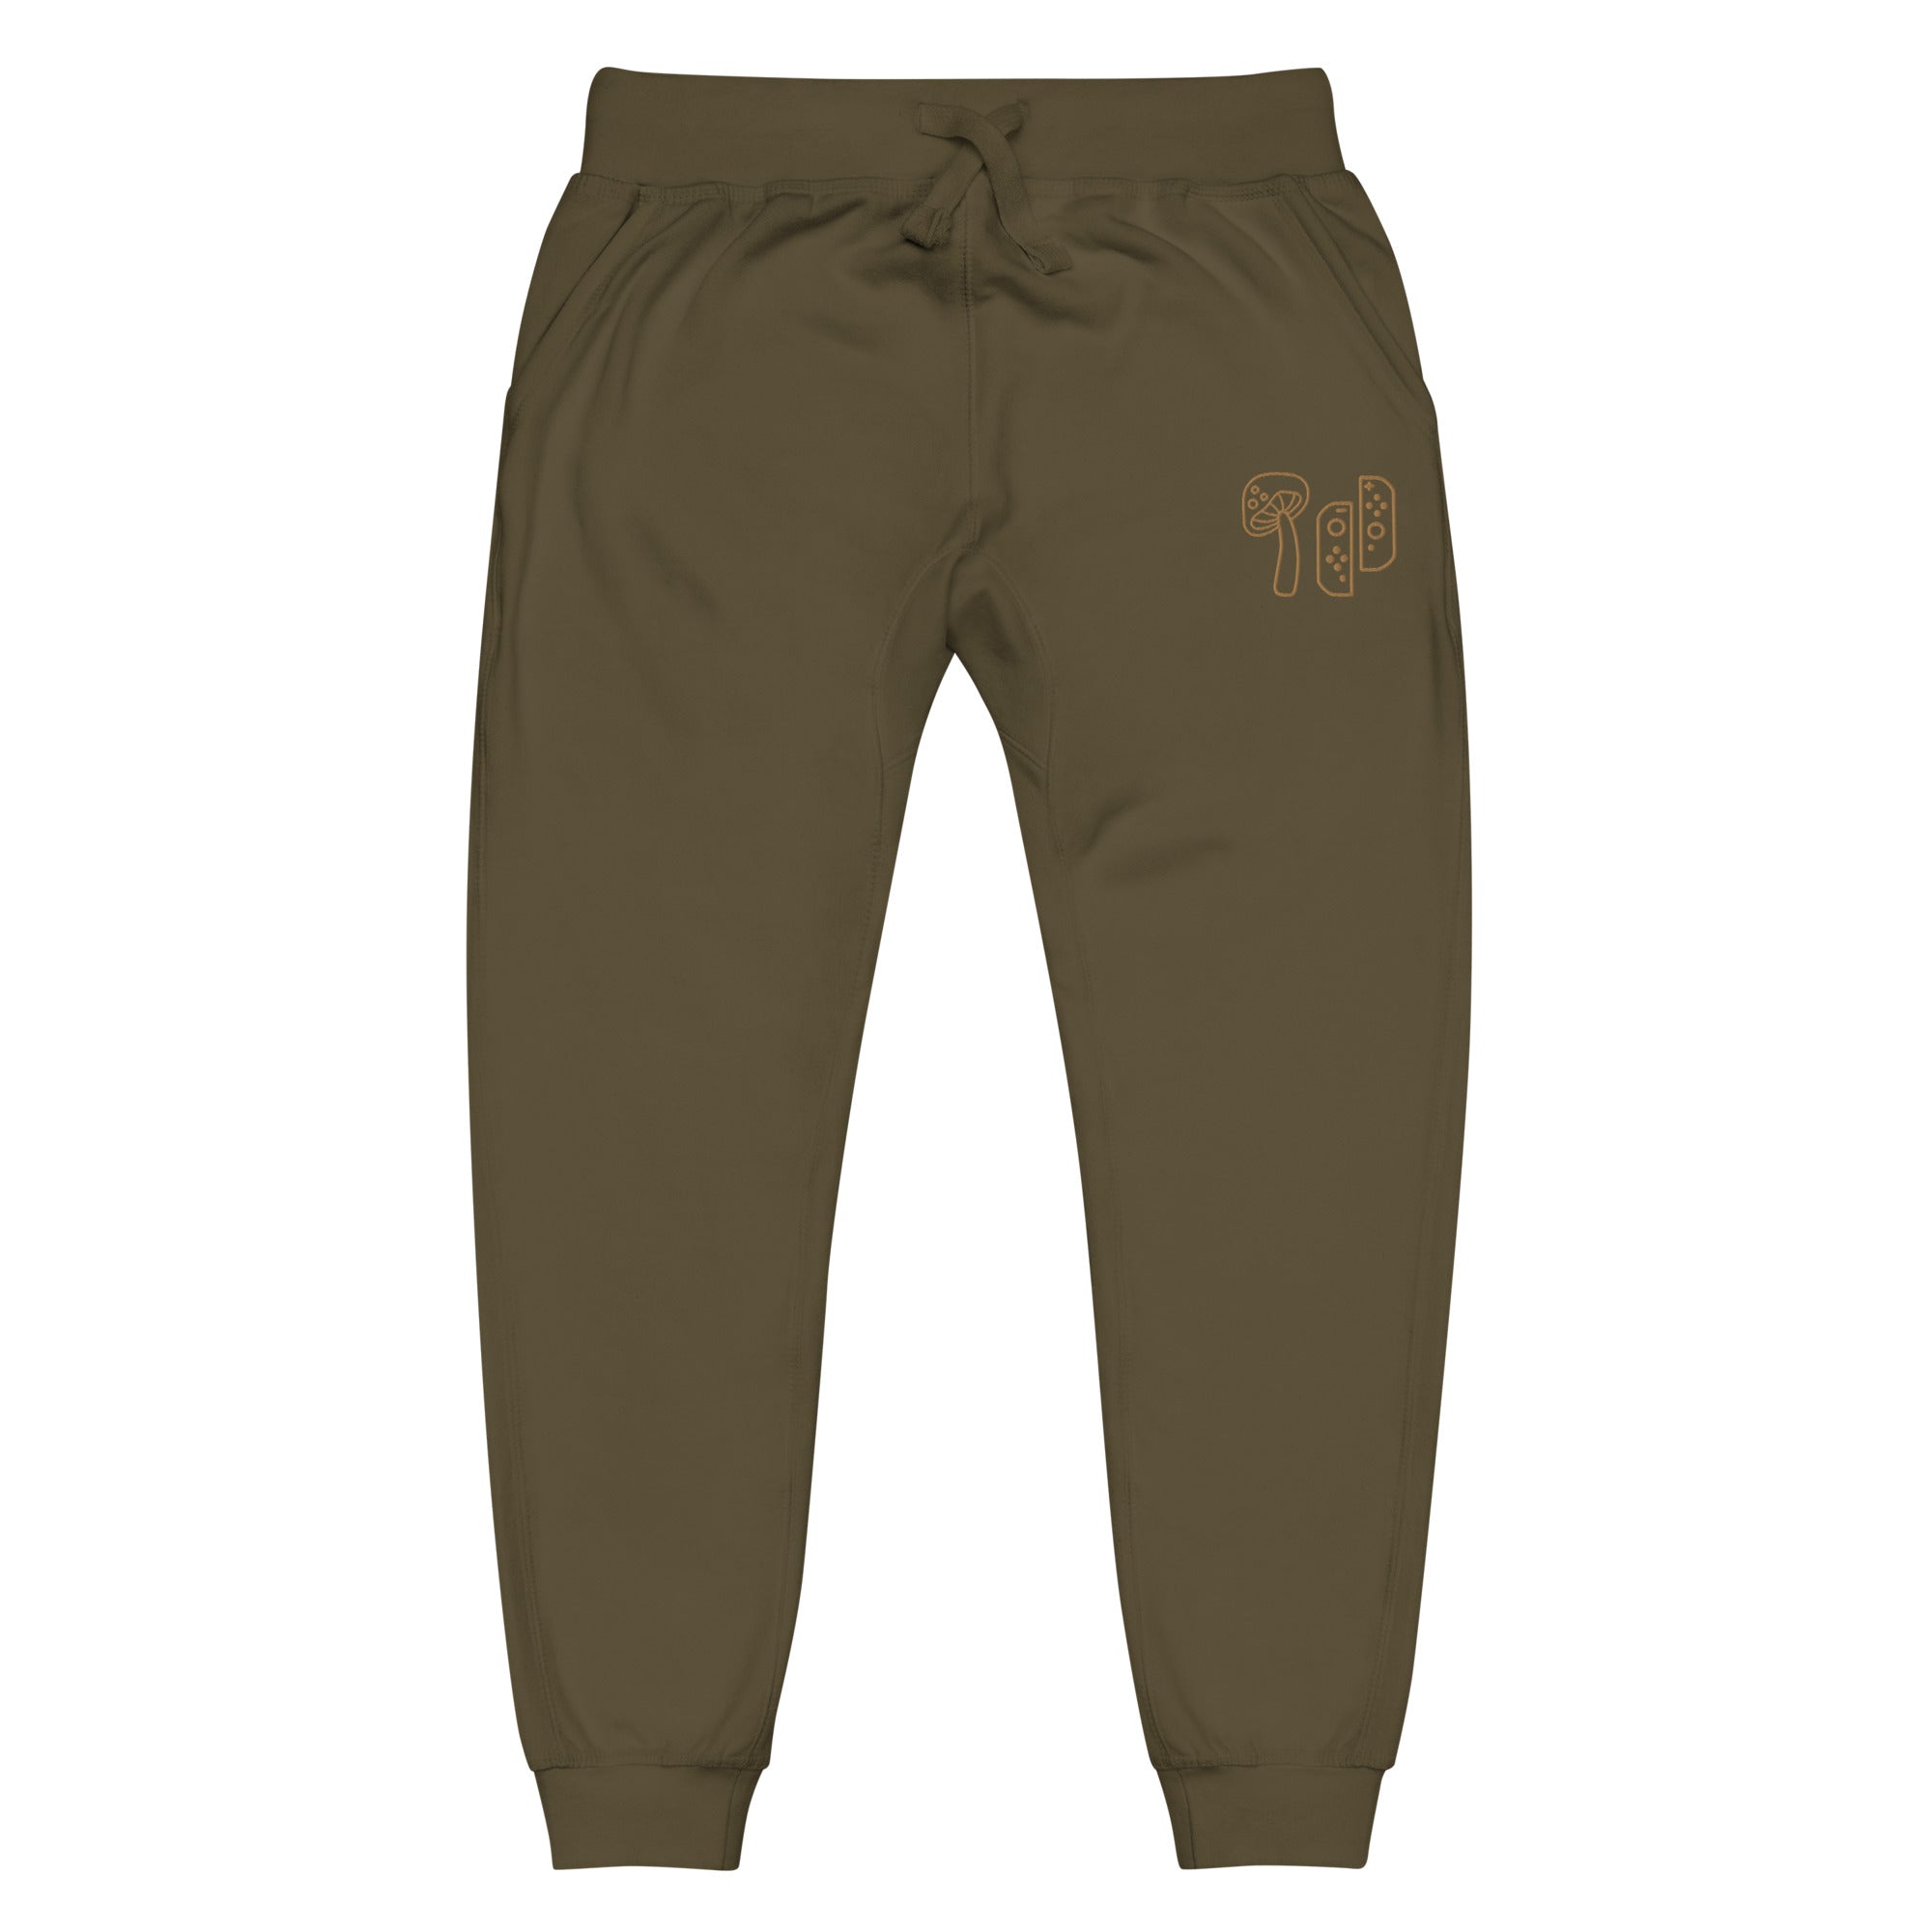 Mushroom & Switch | Unisex fleece sweatpants | Cozy Gamer Threads and Thistles Inventory Military Green XS 